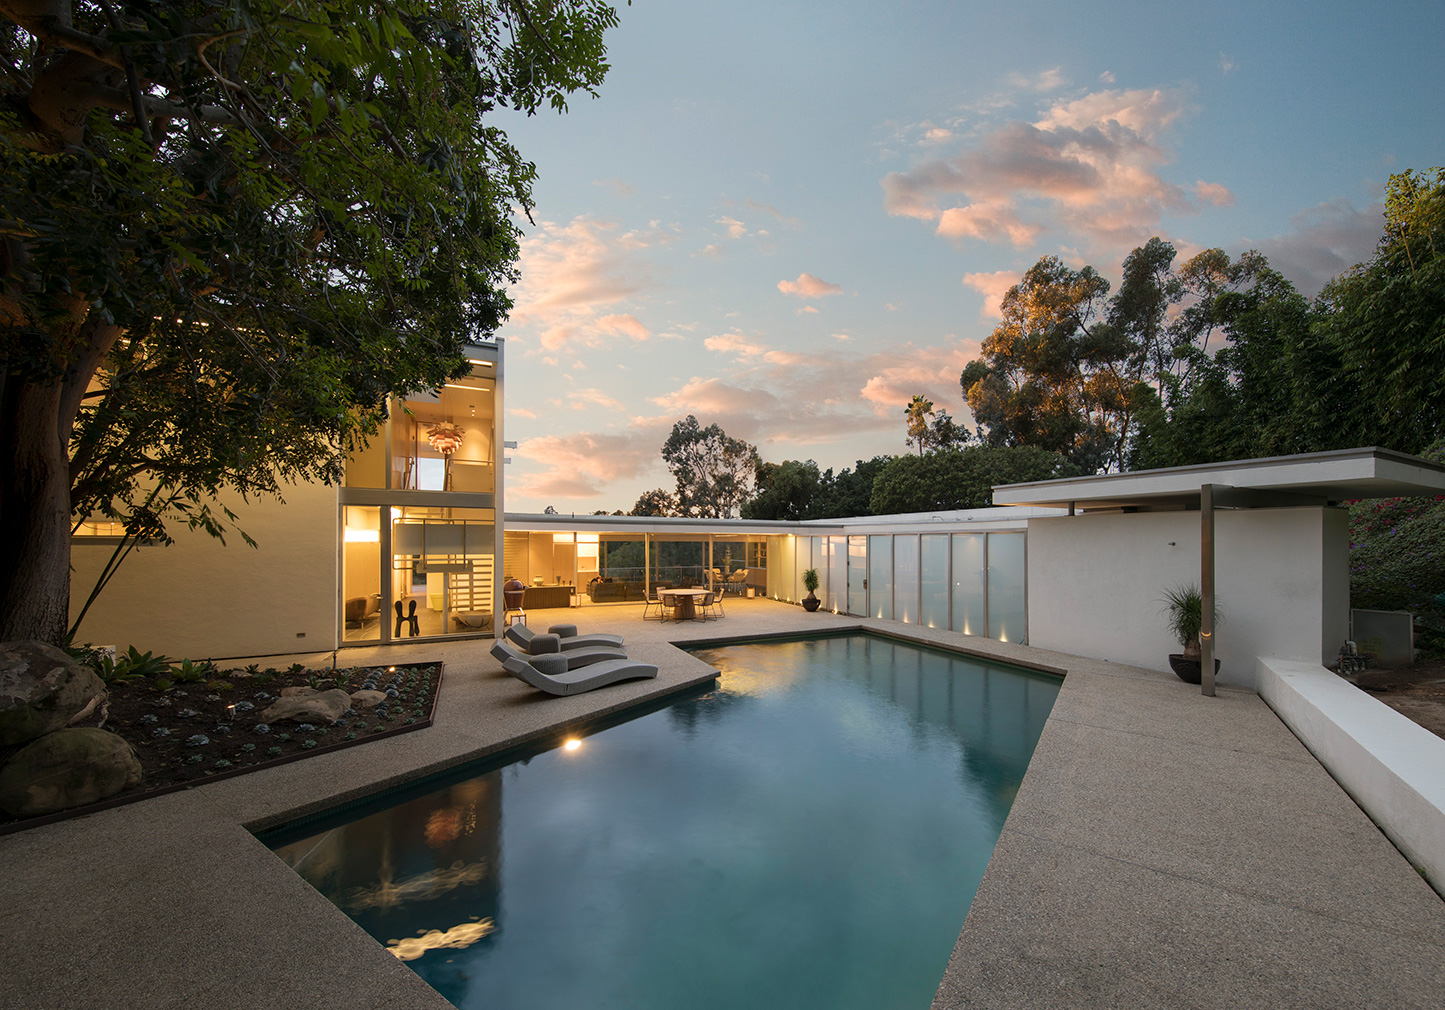 Richard Neutra’s refreshed Hammerman House lists for $13.5m in LA